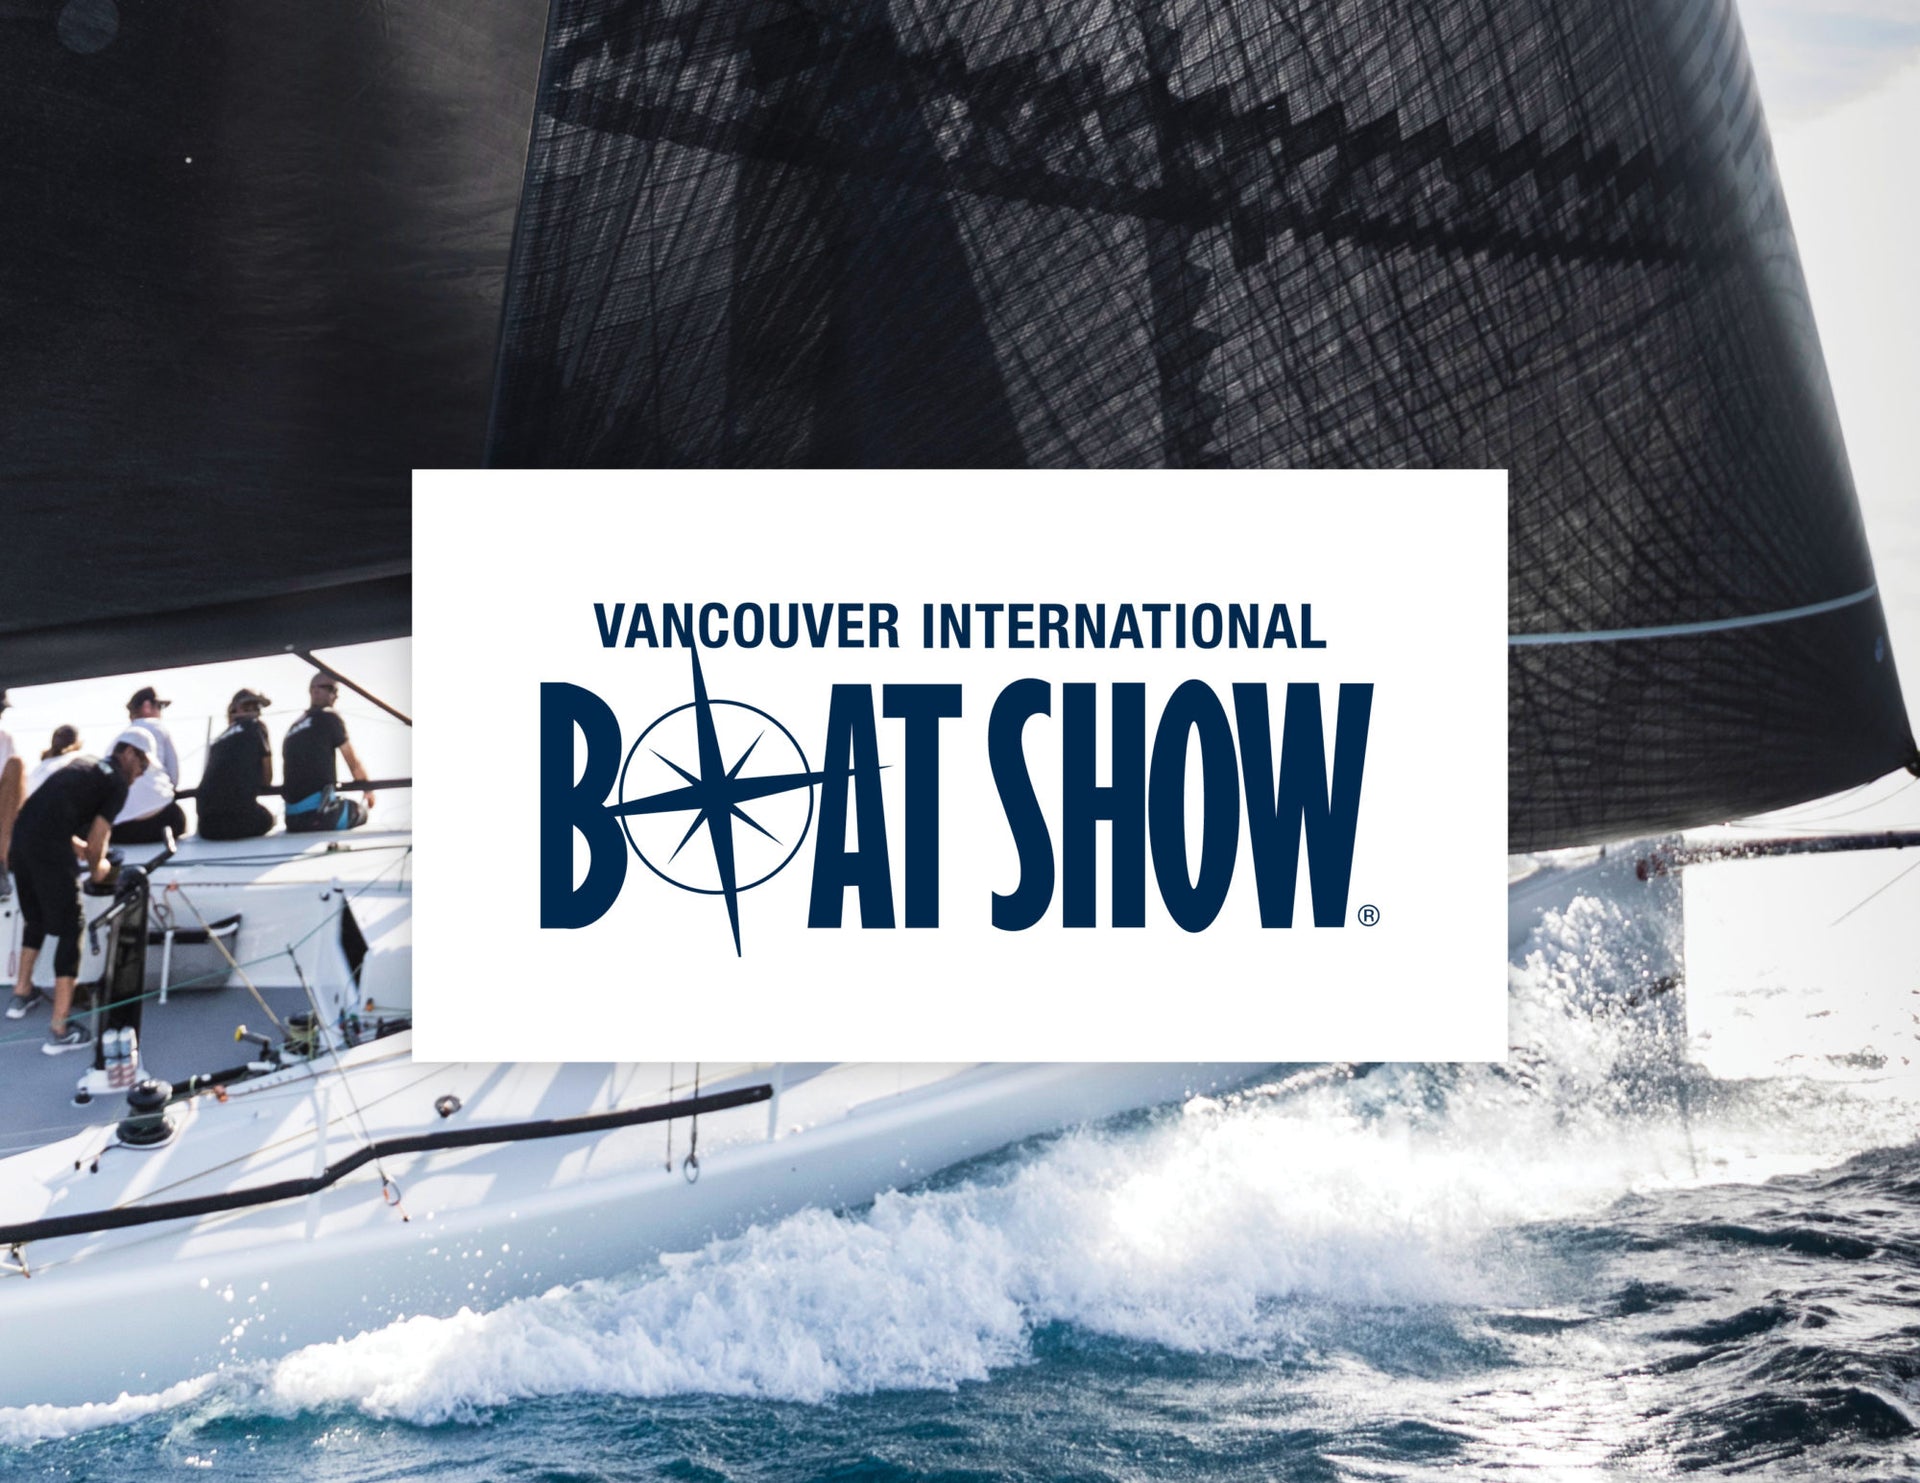 JOIN US AT THE VANCOUVER BOAT SHOW